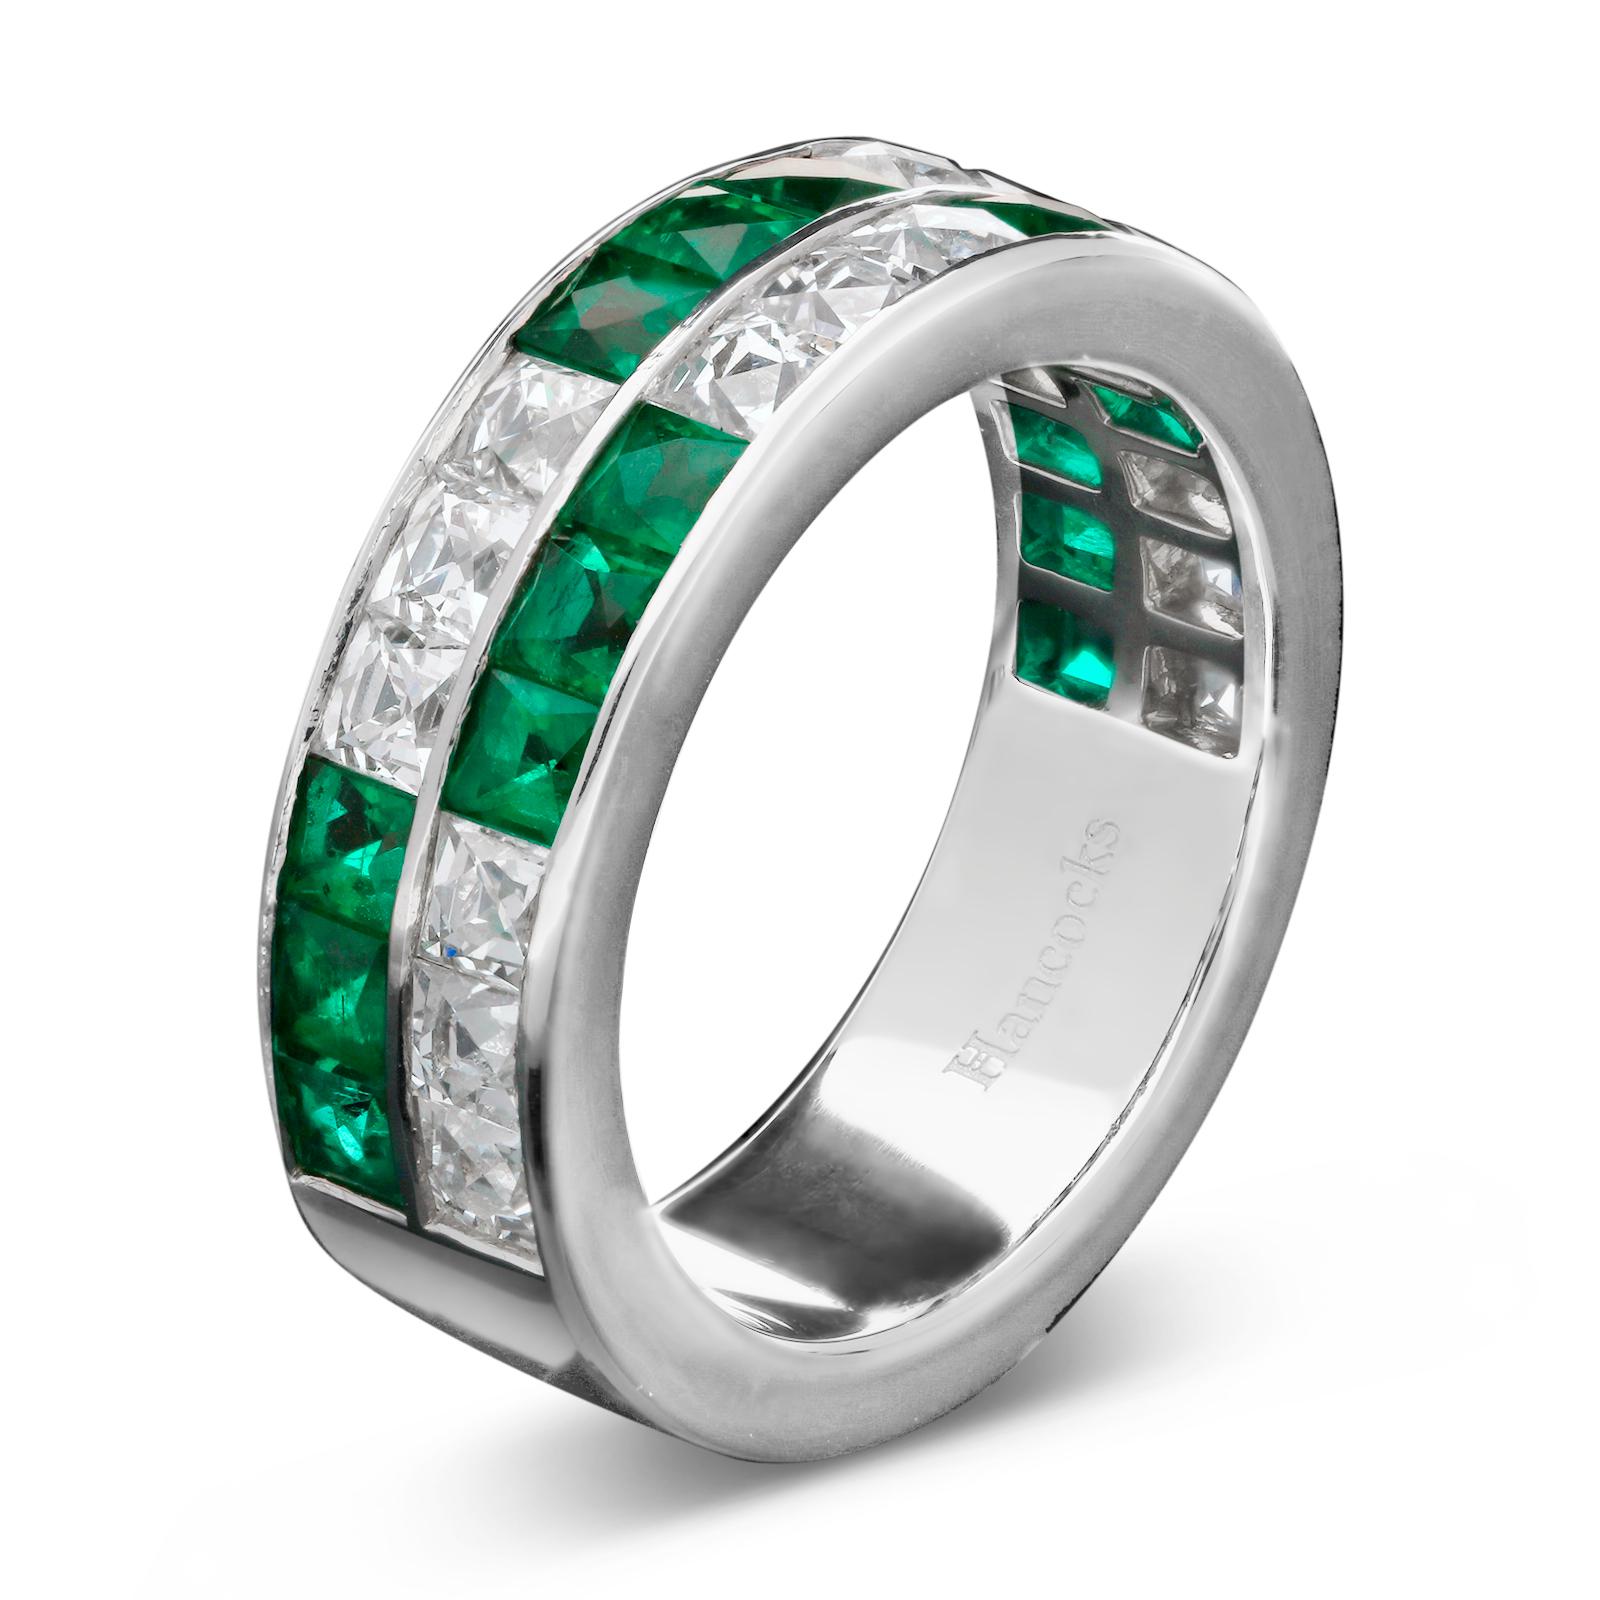 A striking and unusual double row eternity ring by Hancocks set to the front with two rows of alternating sections of three square French-cut emeralds and three square French-cut diamonds, all in a handmade platinum mount with straight band and hand